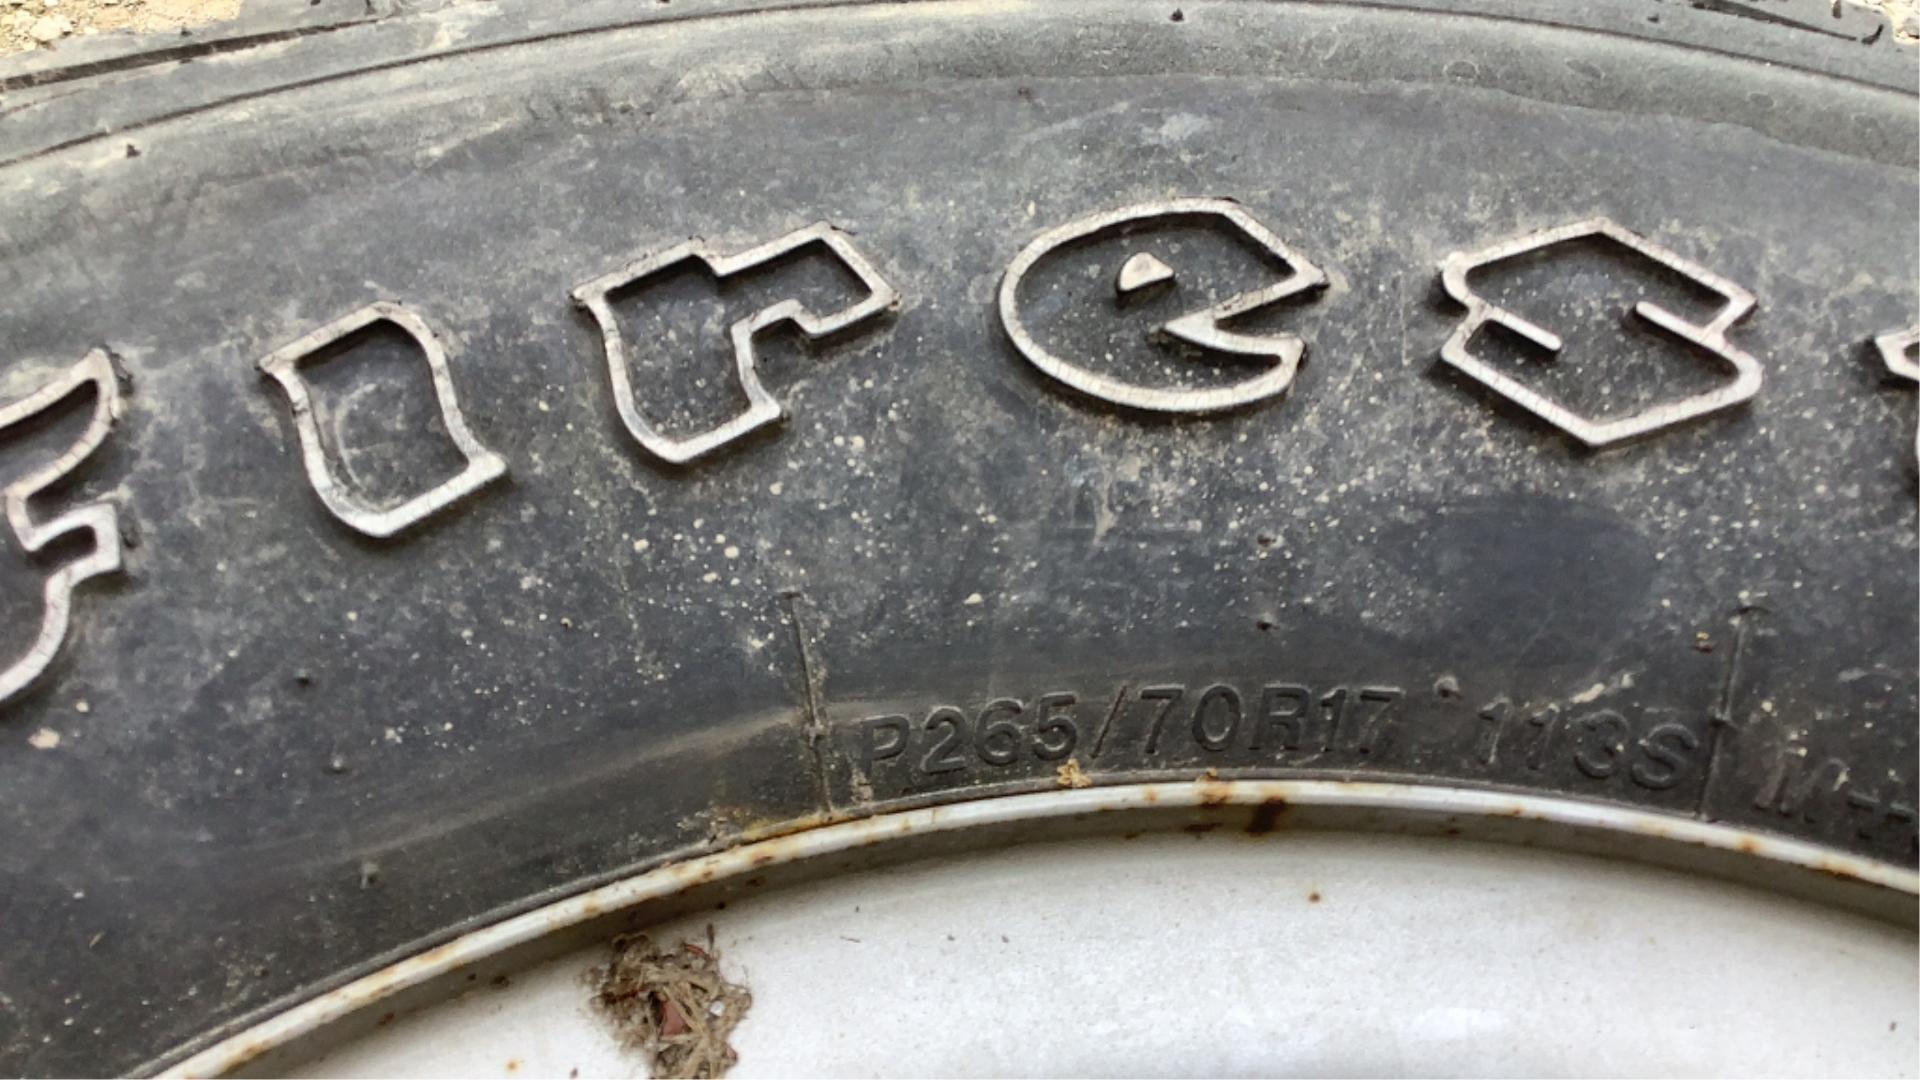 (6) Assorted Tires